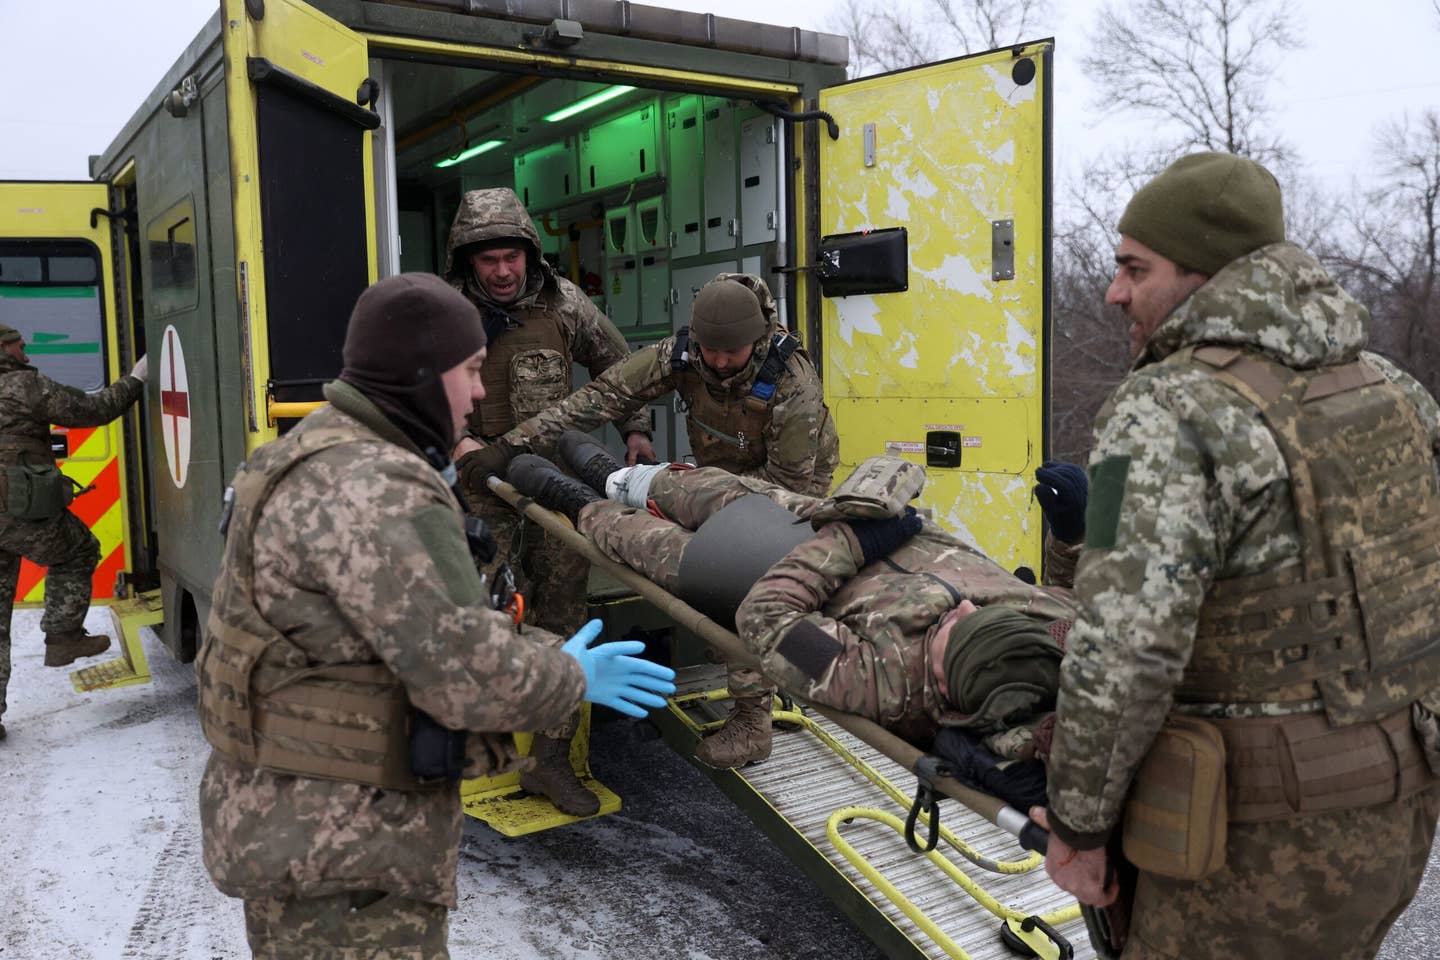 Medics of the Ukrainian Army evacuate a wounded soldier on a road near Soledar. (Photo by Anatolii Stepanov / AFP) (Photo by ANATOLII STEPANOV/AFP via Getty Images)